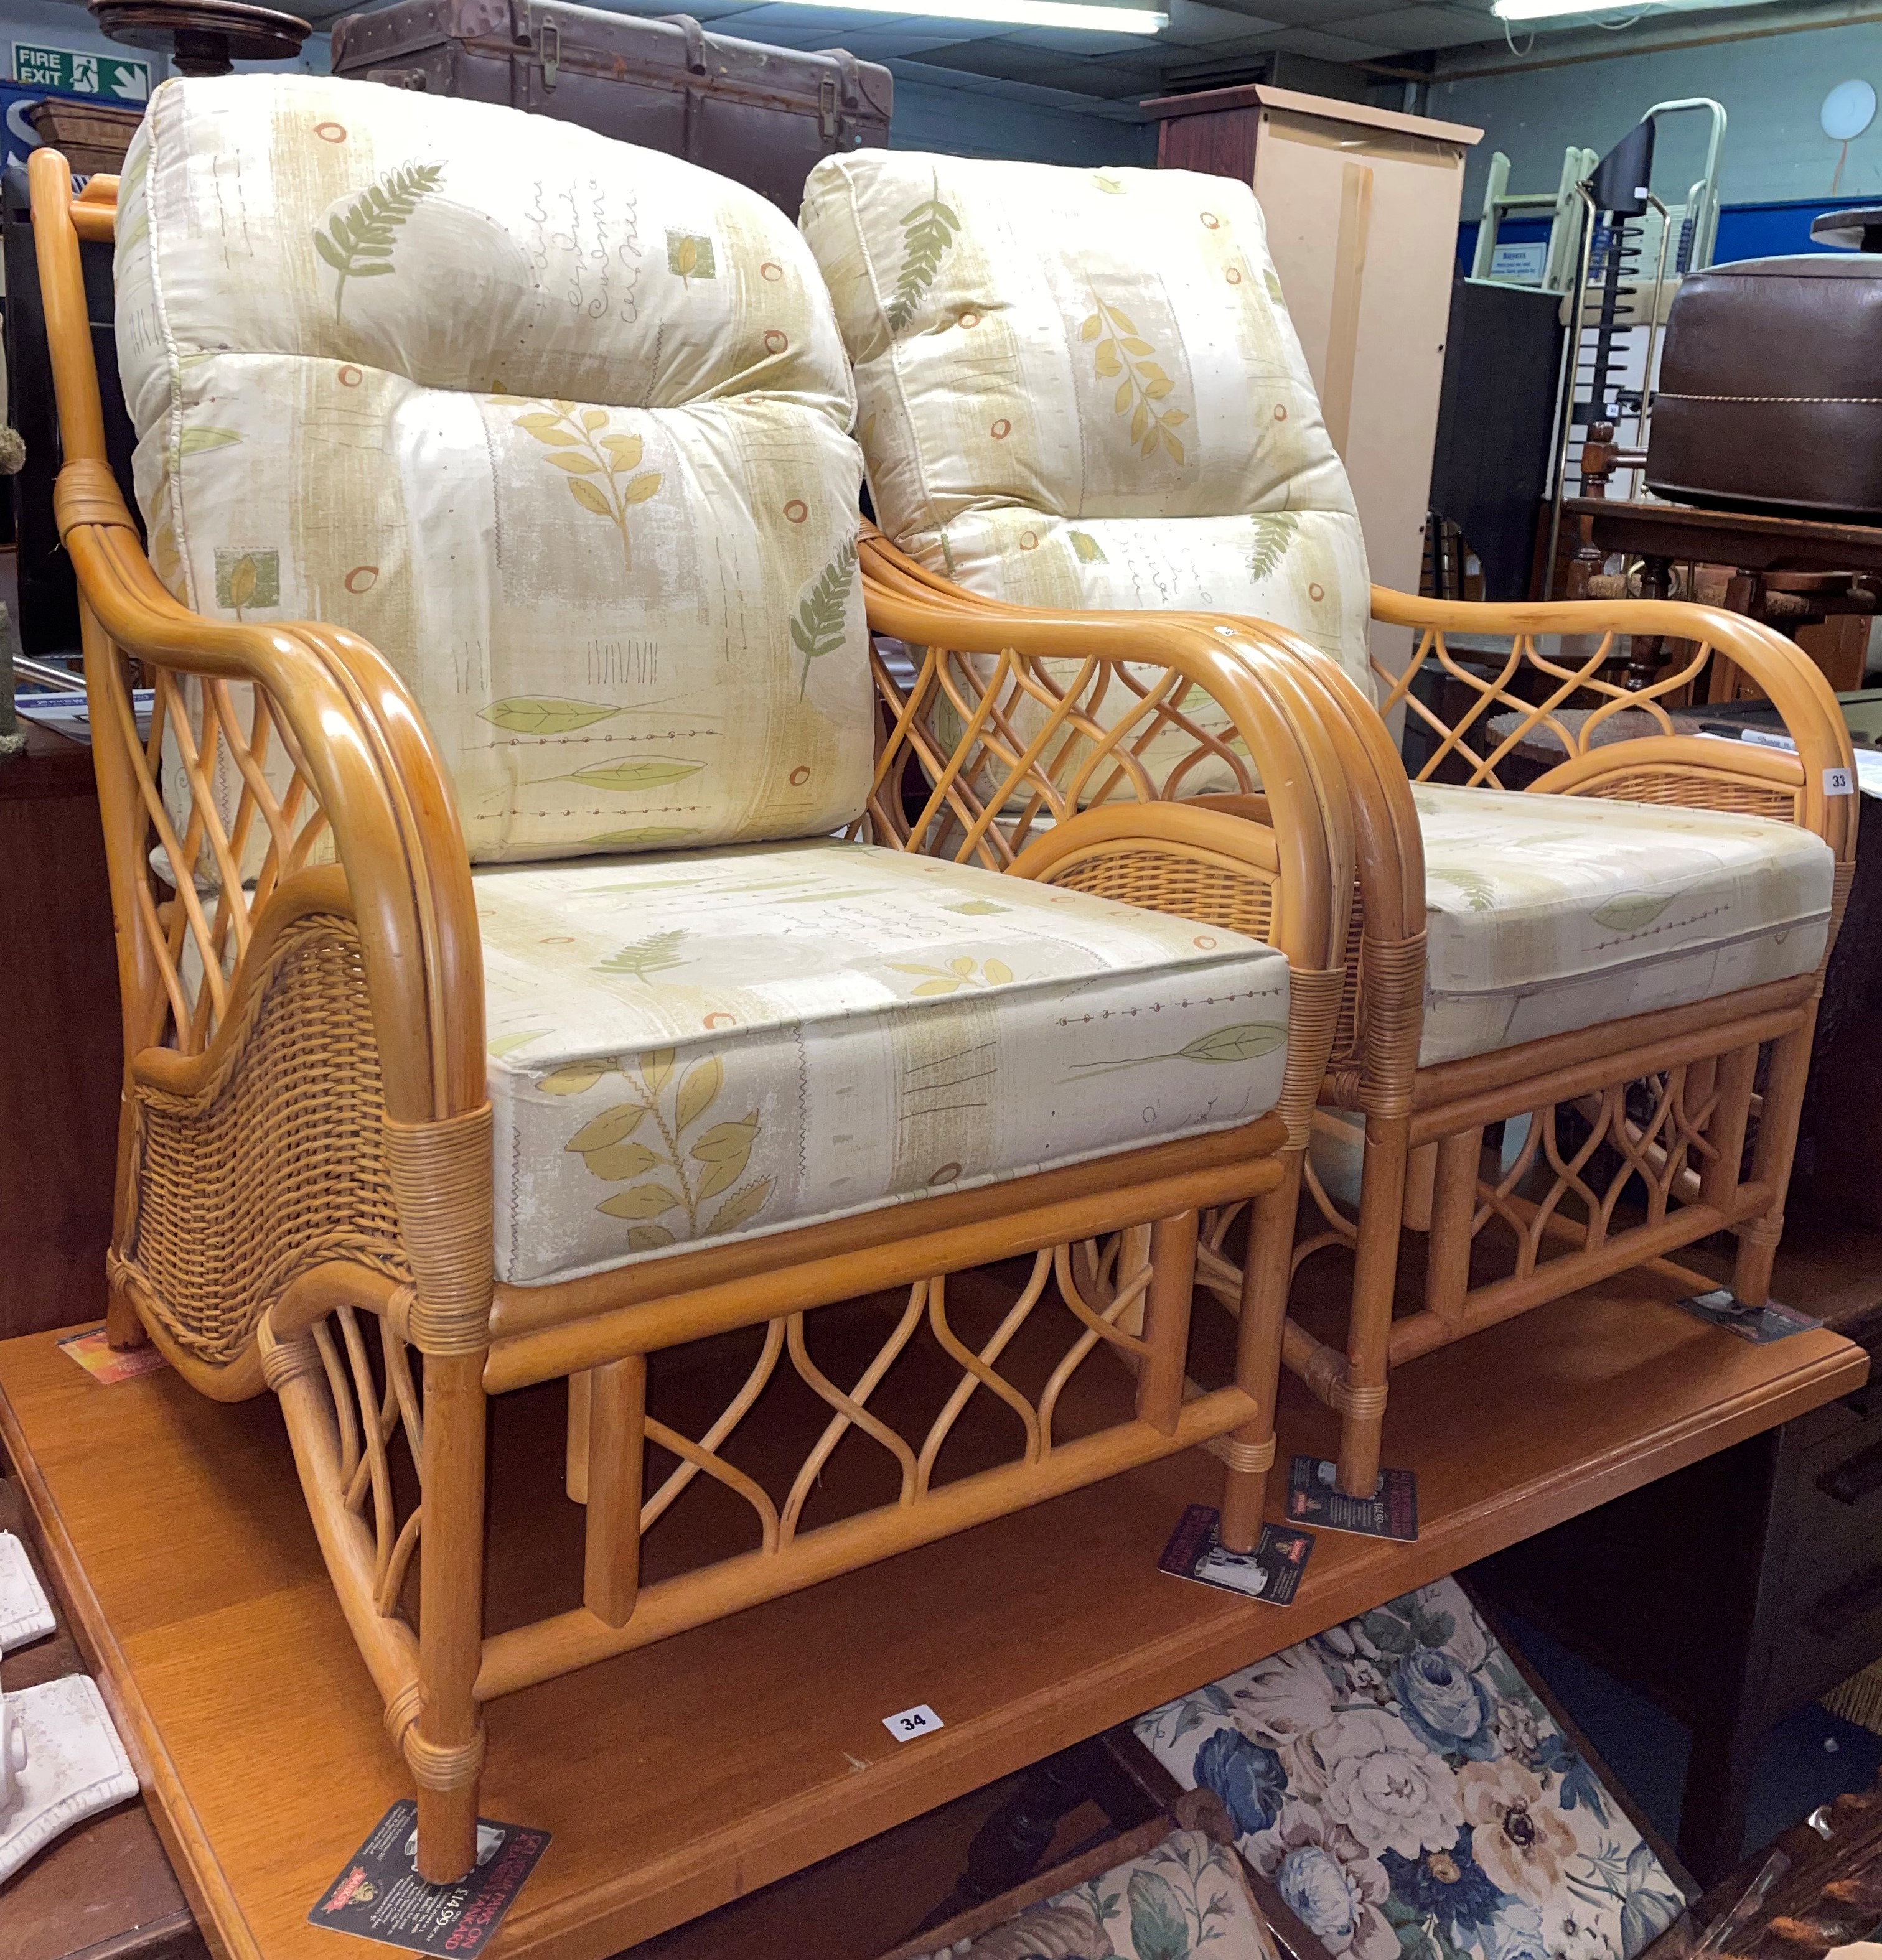 PAIR OF BAMBOO AND RATTAN CONSERVATORY ARMCHAIRS